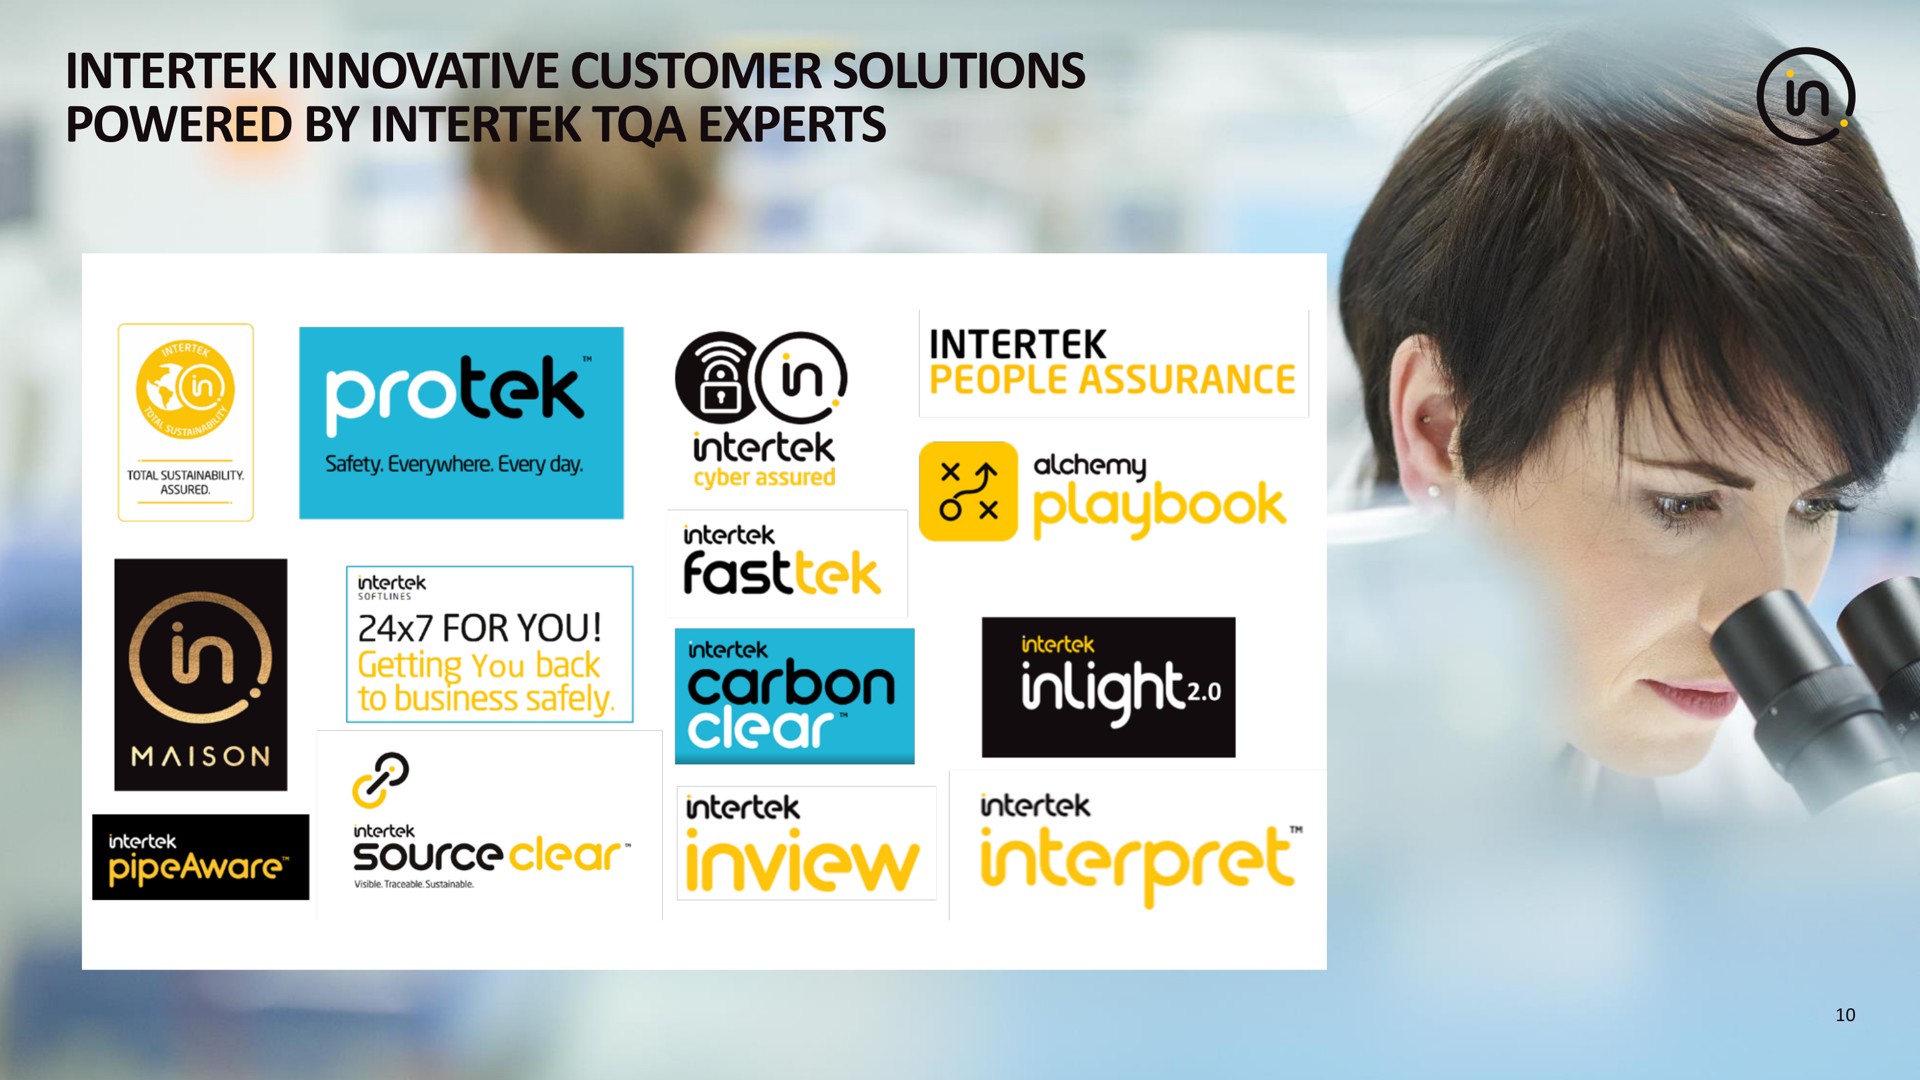 innovative customer solutions powered by experts pro fast | Intertek